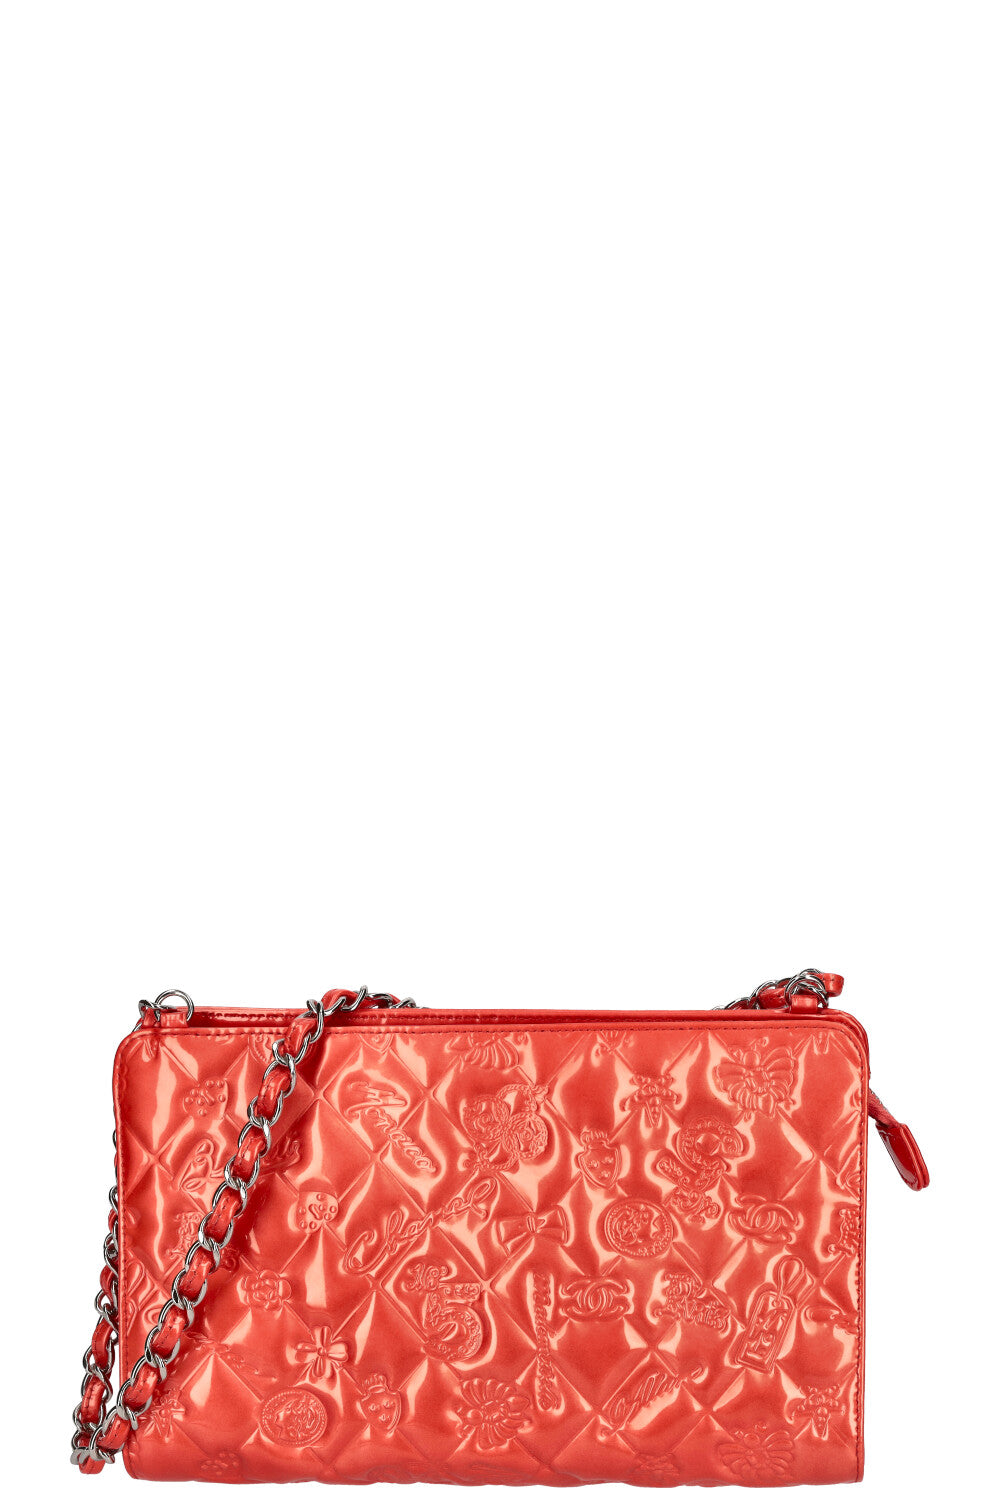 CHANEL Mademoiselle Bag Patent Coral